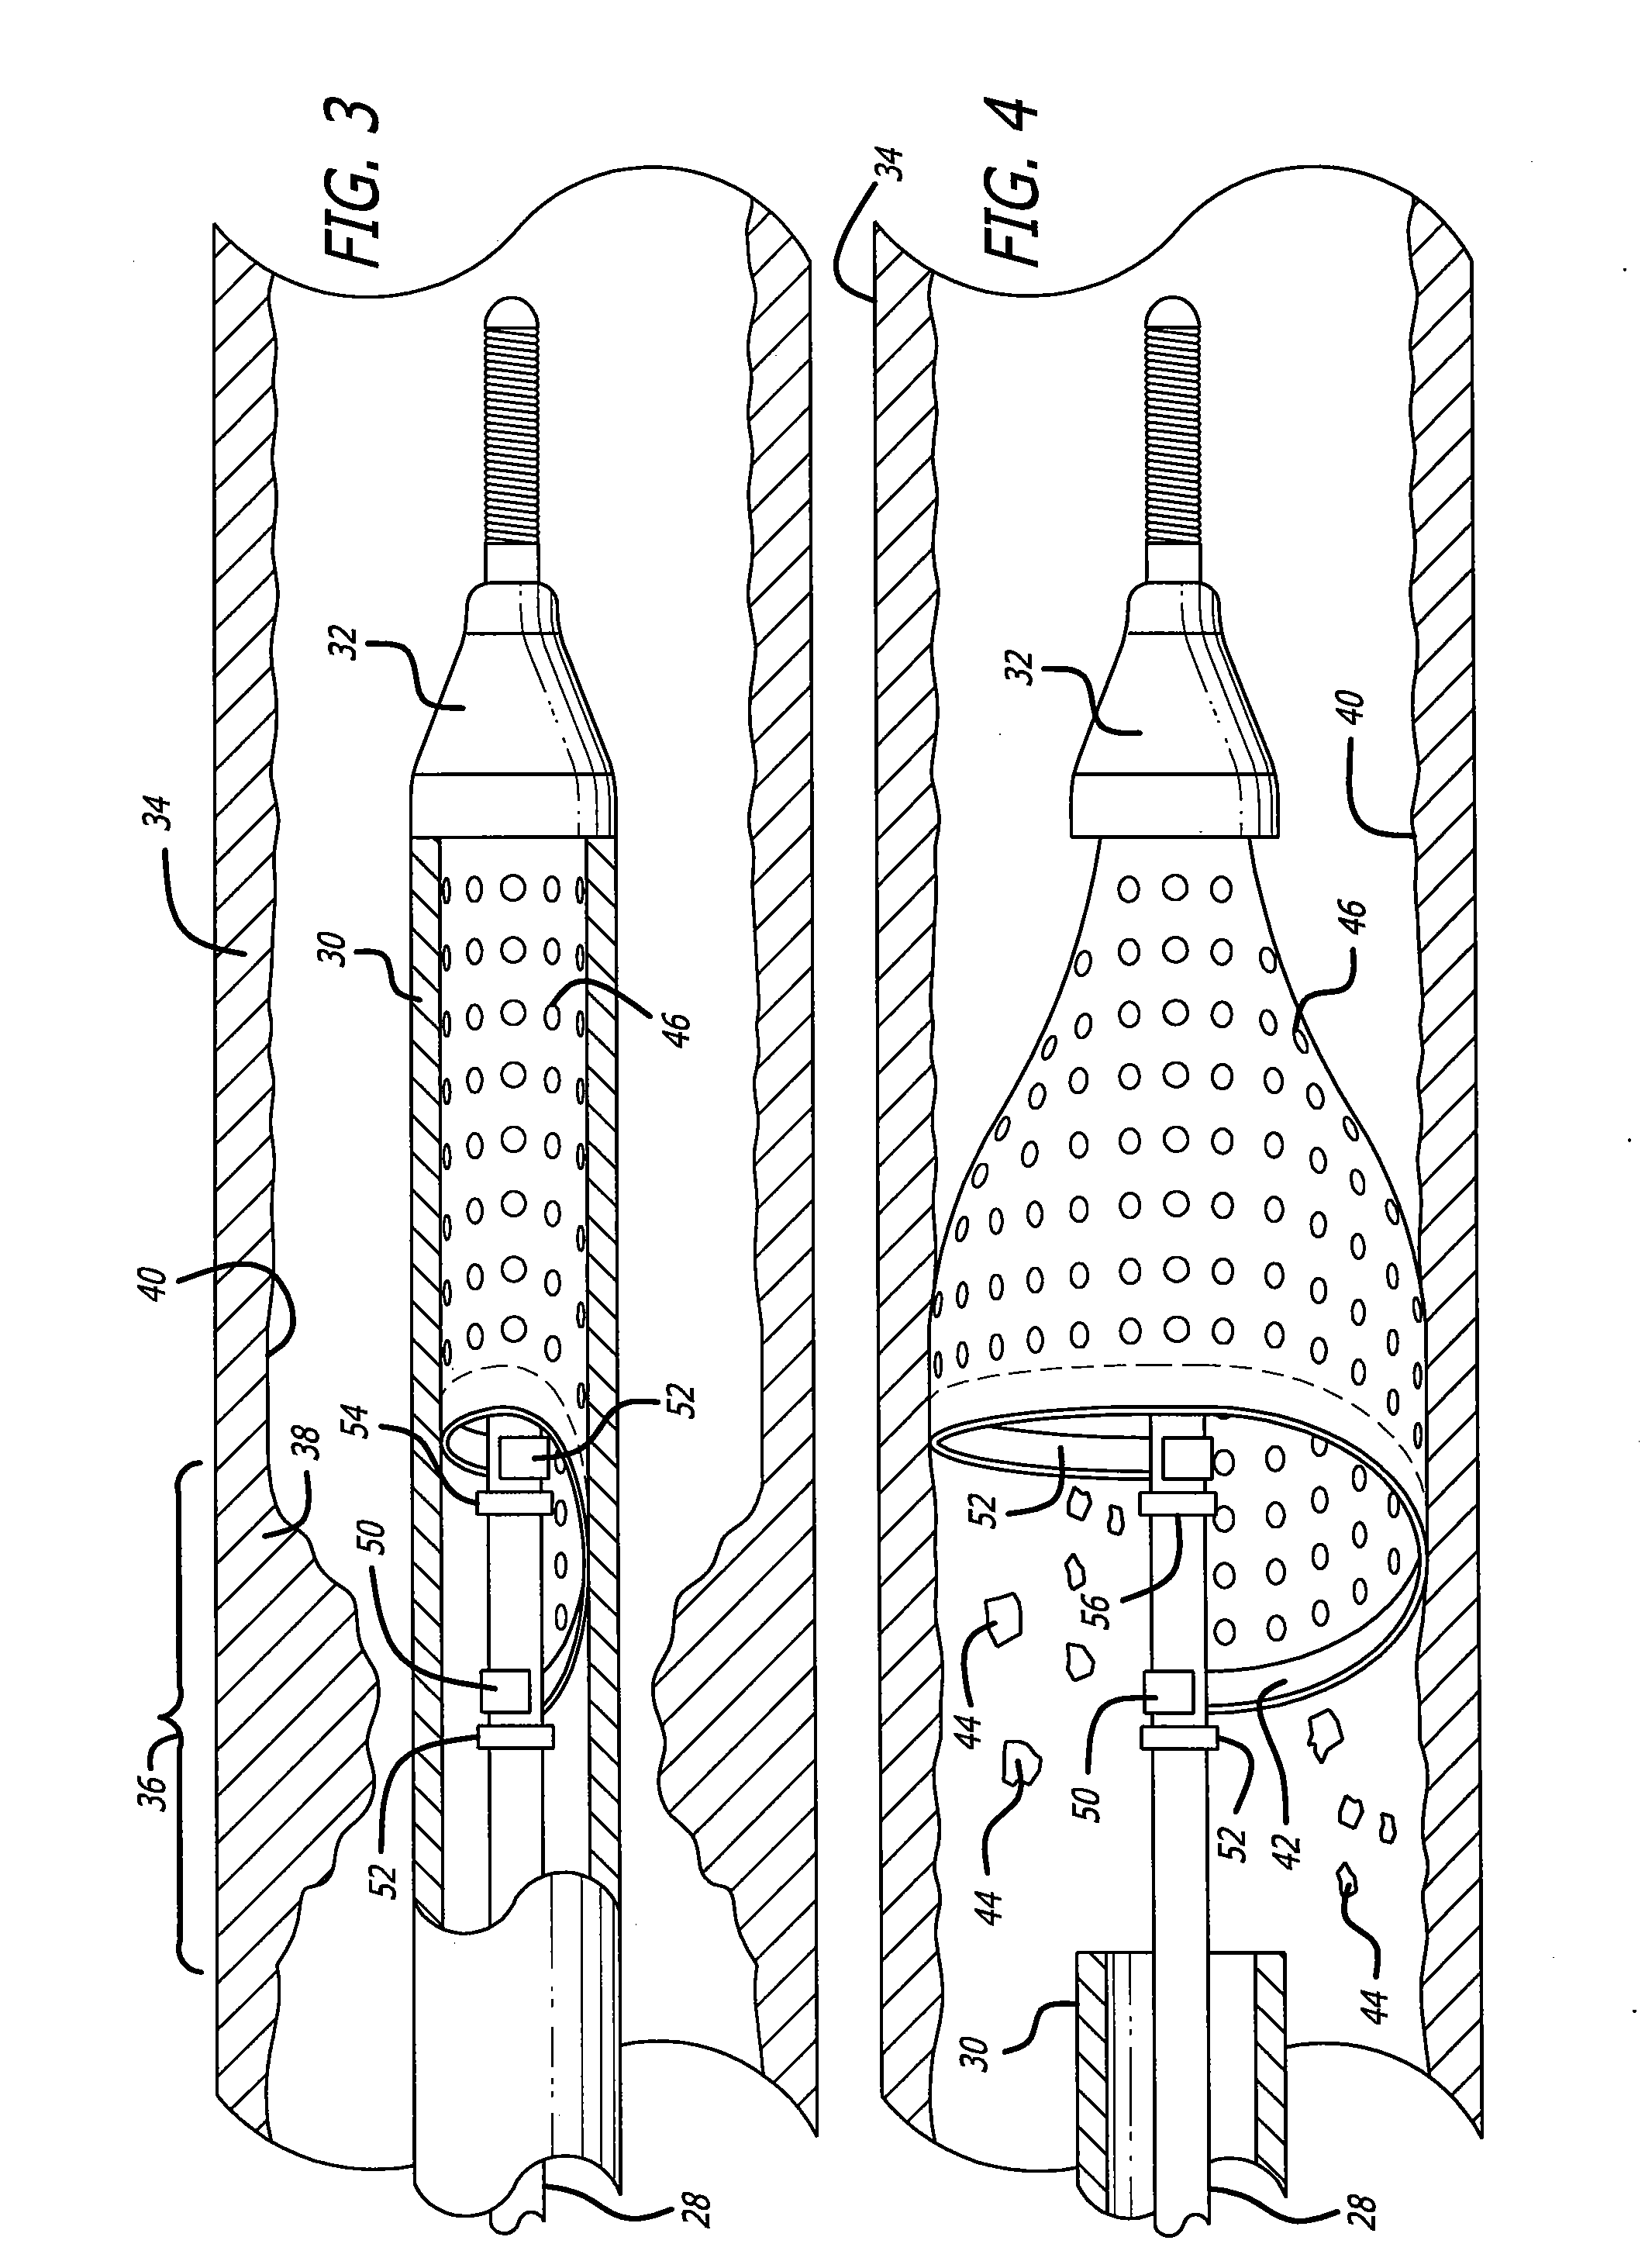 Single-wire expandable cages for embolic filtering devices